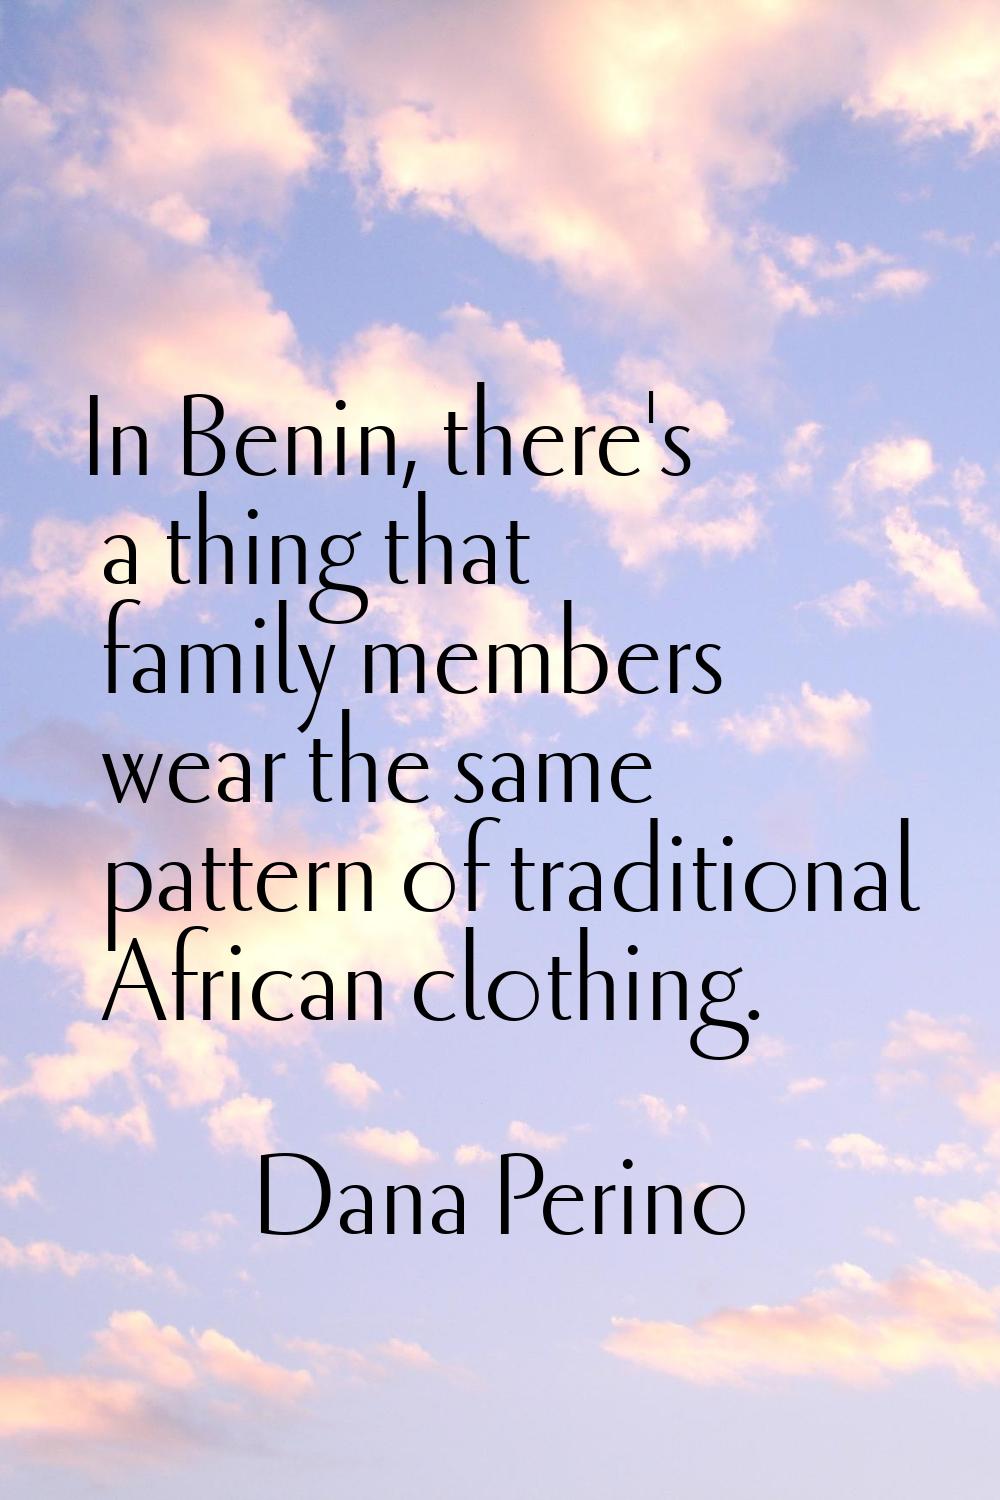 In Benin, there's a thing that family members wear the same pattern of traditional African clothing